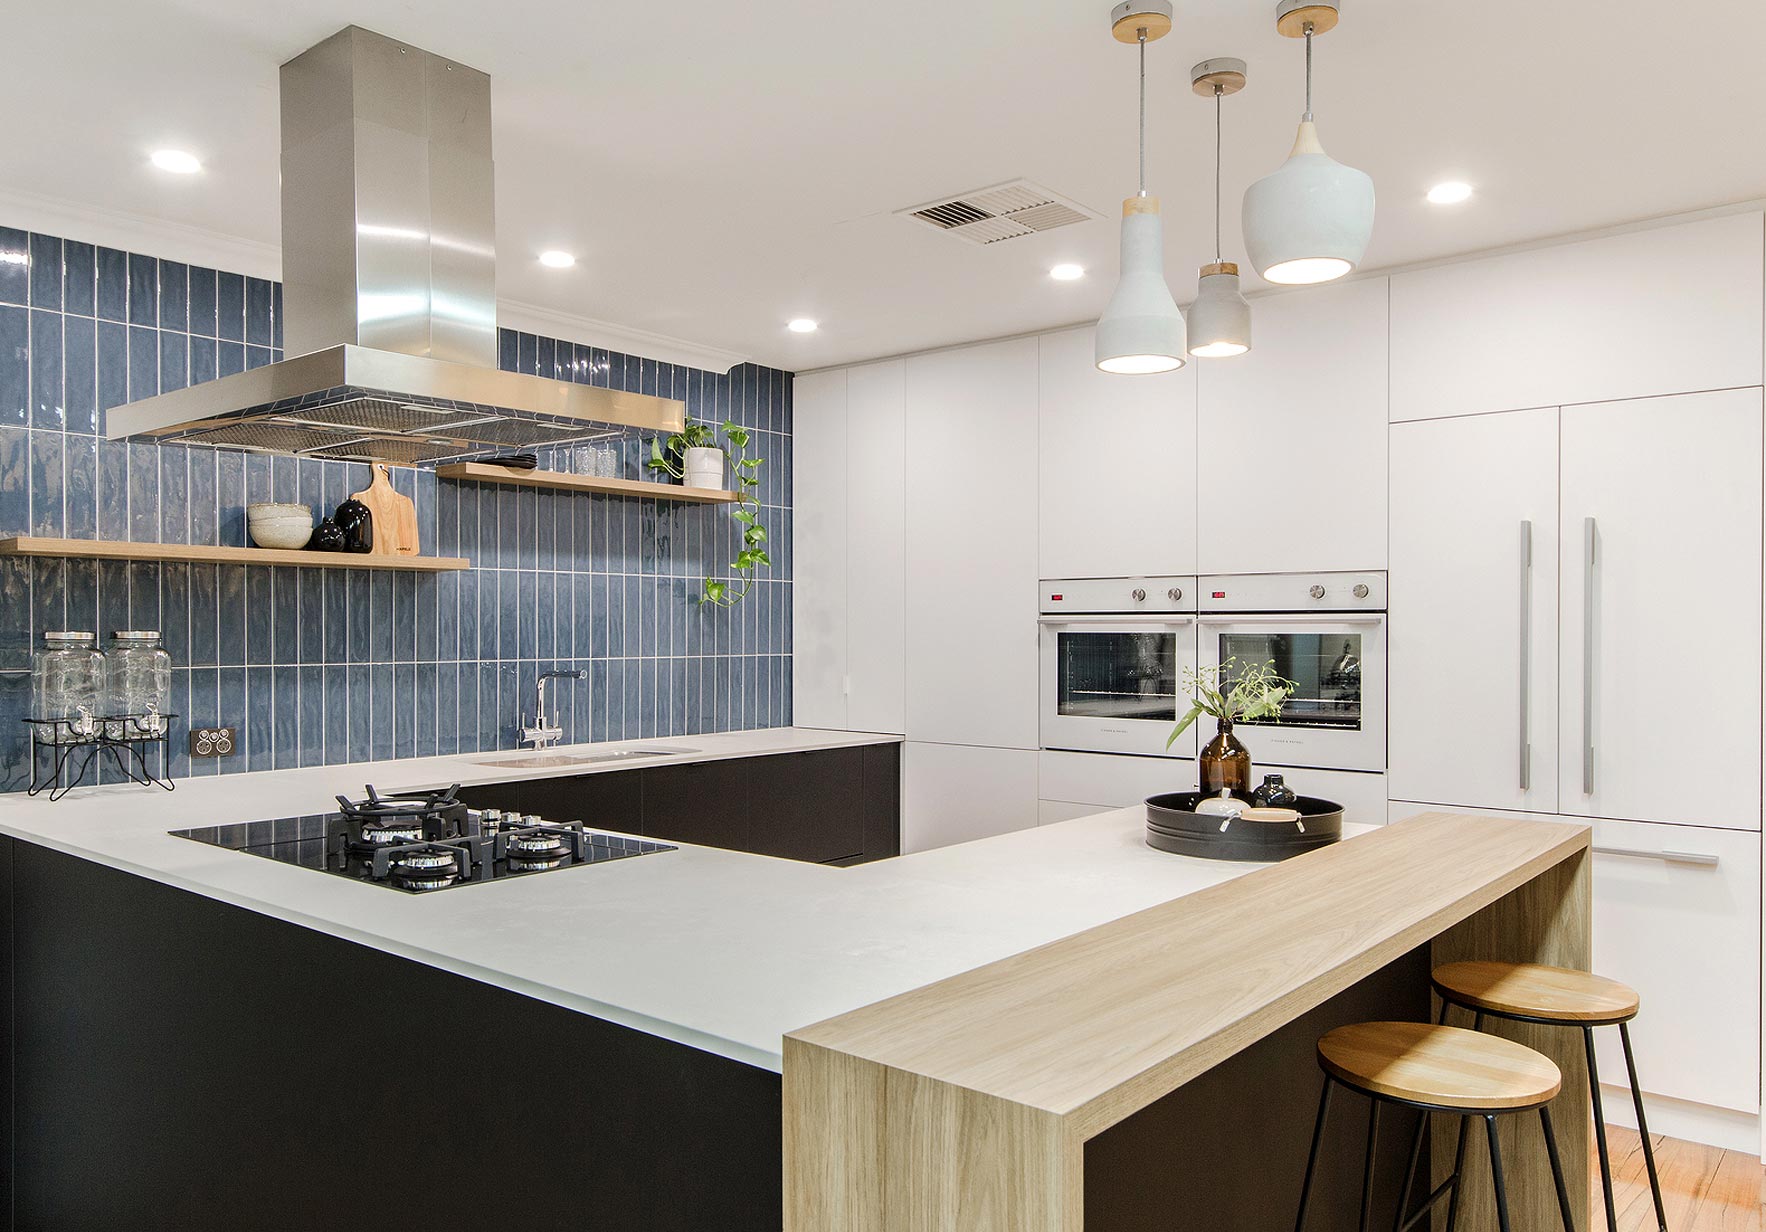 8 Factors to Consider for Your Kitchen Design - What to Know